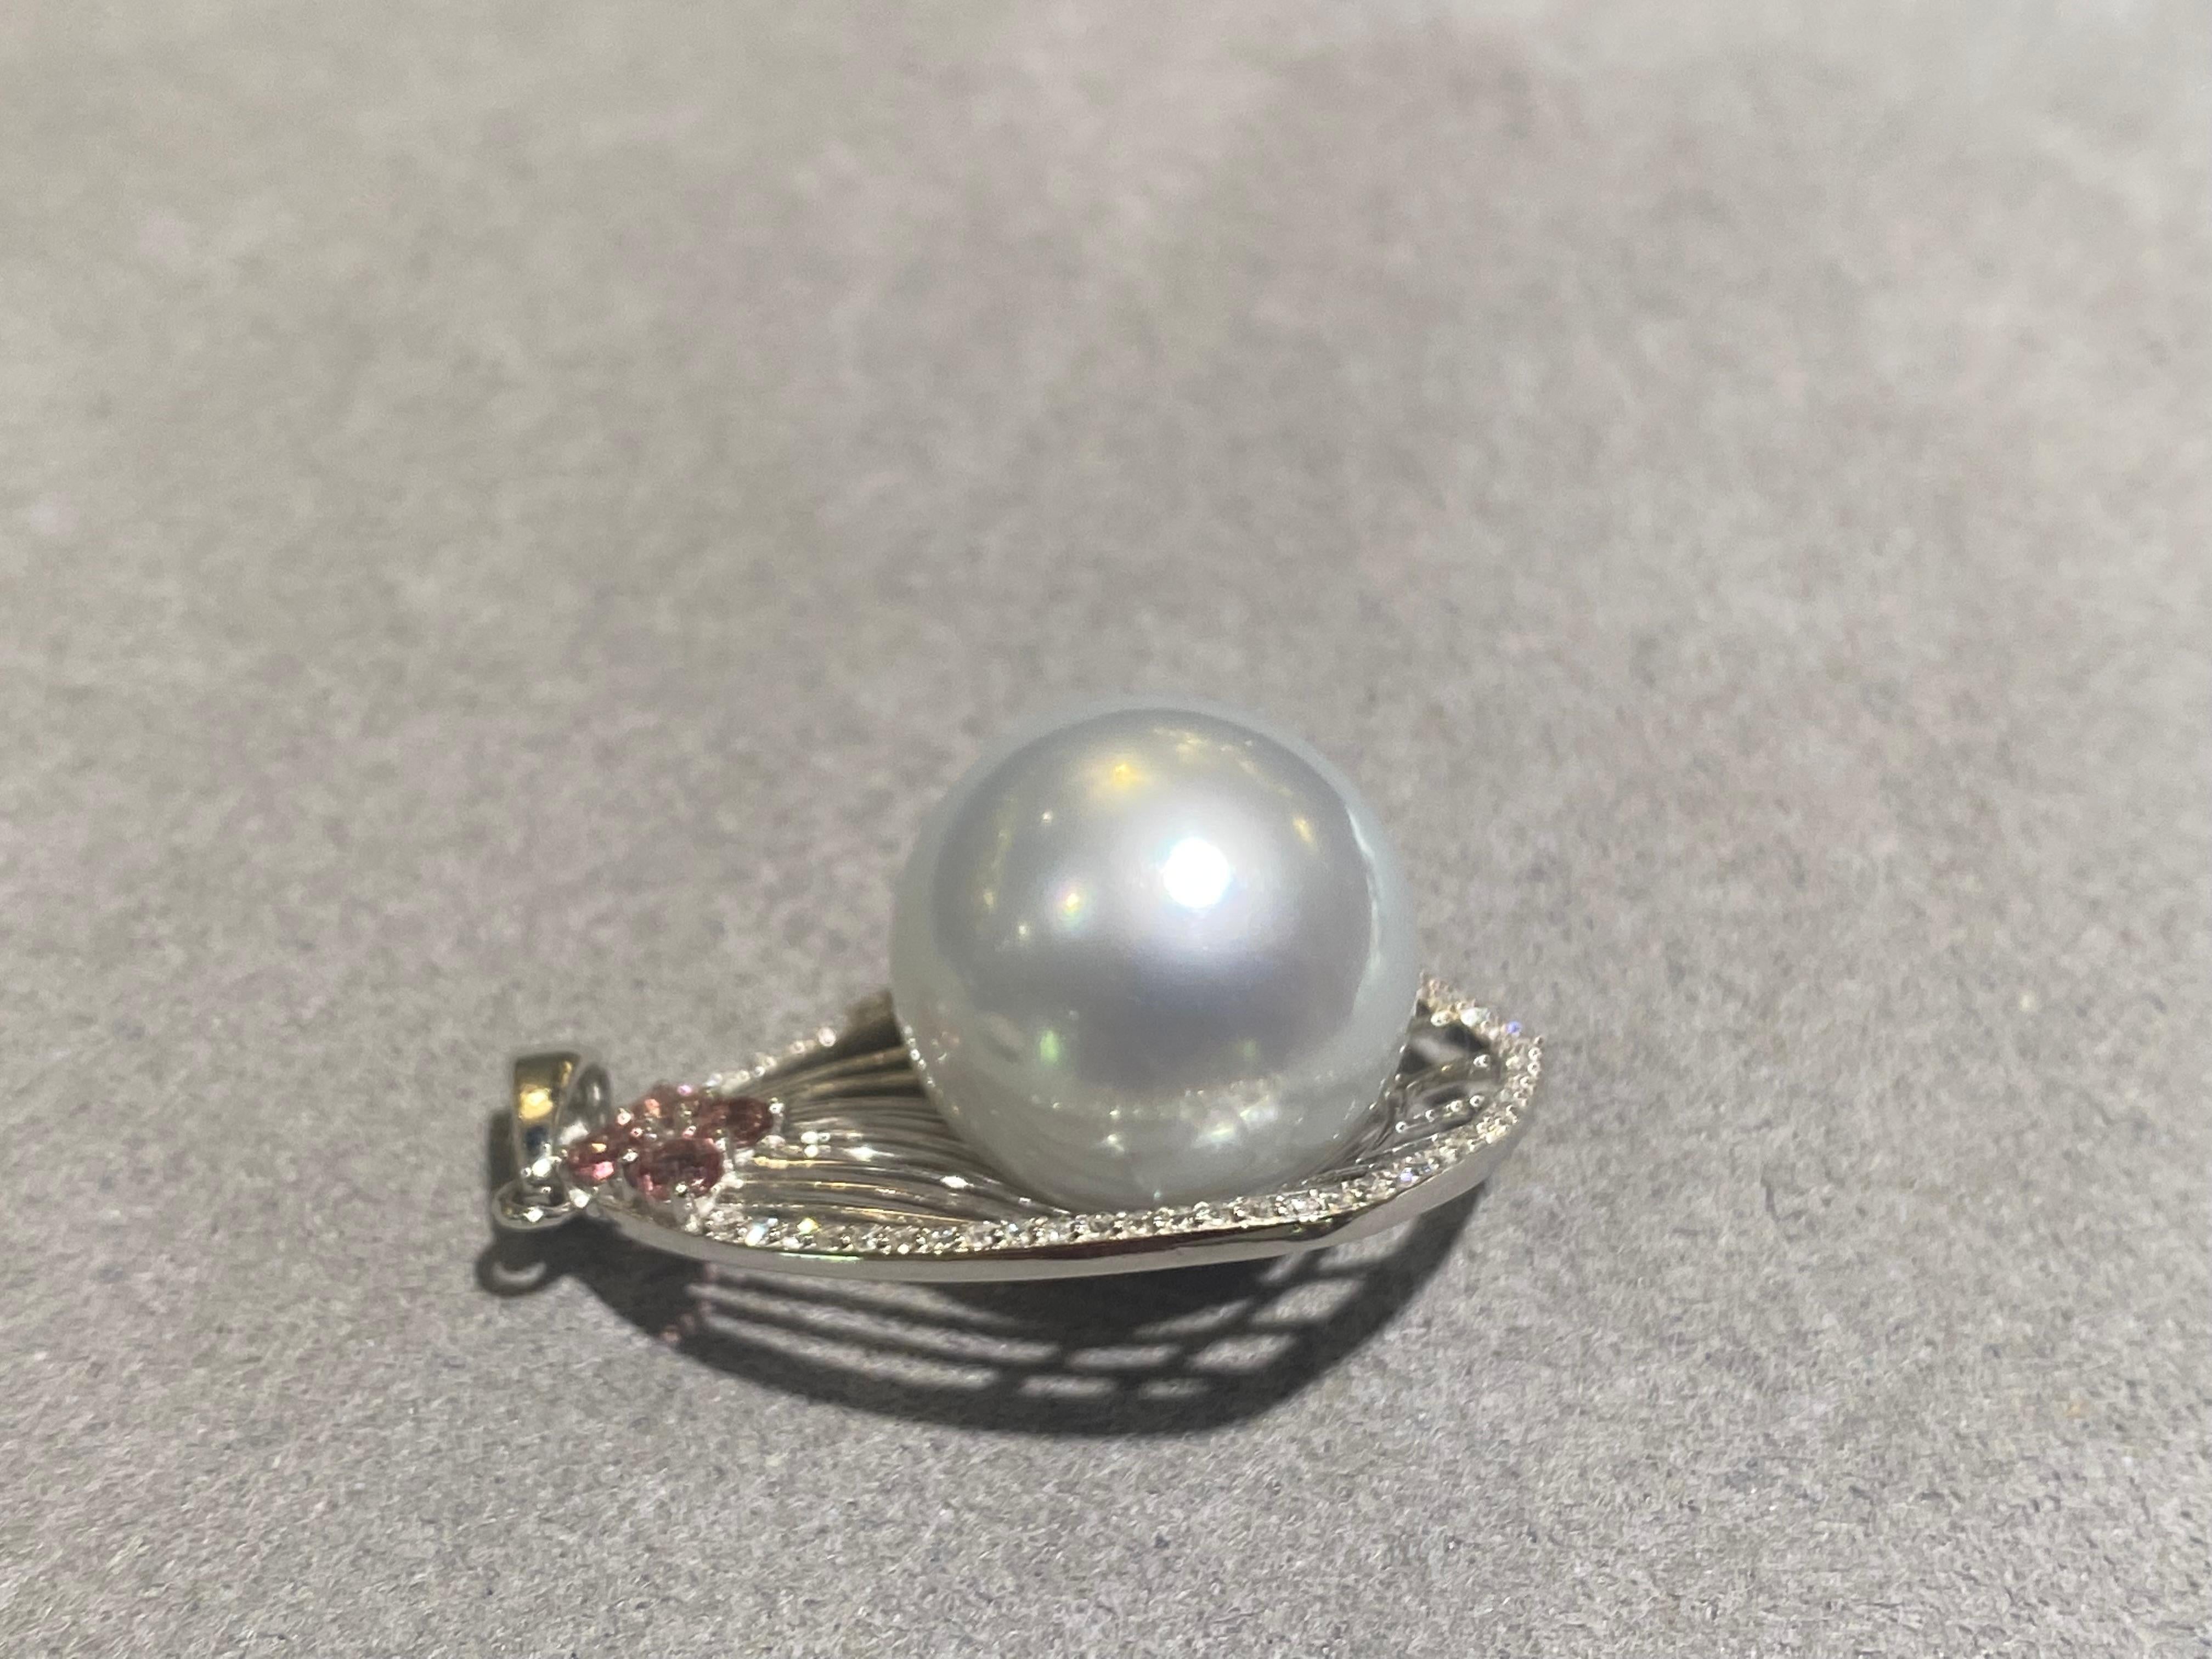 The 14.3mm White Australian South Sea Pearl was set in the middle of a kite like pendant. The peripheral of the pendant was set with diamond pave. The pearl is round in shape. It is white in colour with silver/blue overtone. The pearl has good